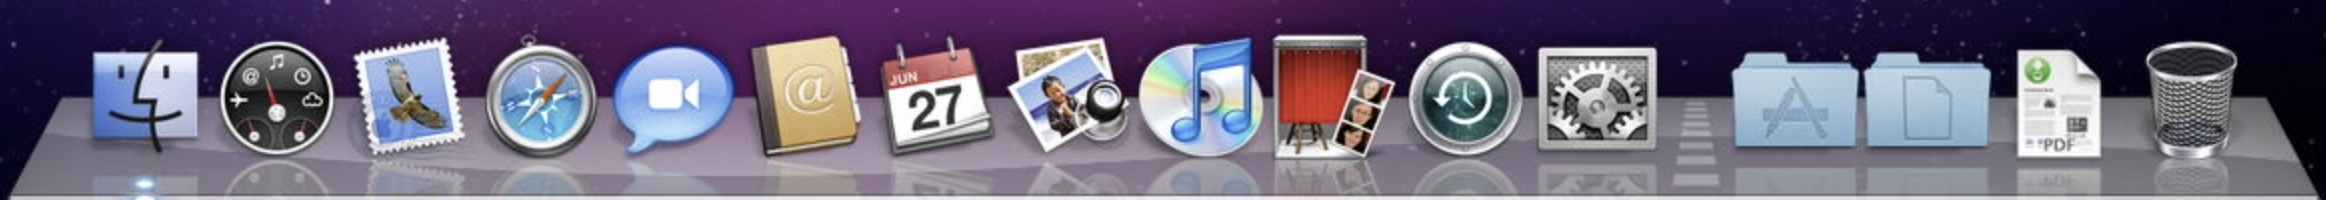 The shiny Dock introduced in Mac OS X Leopard